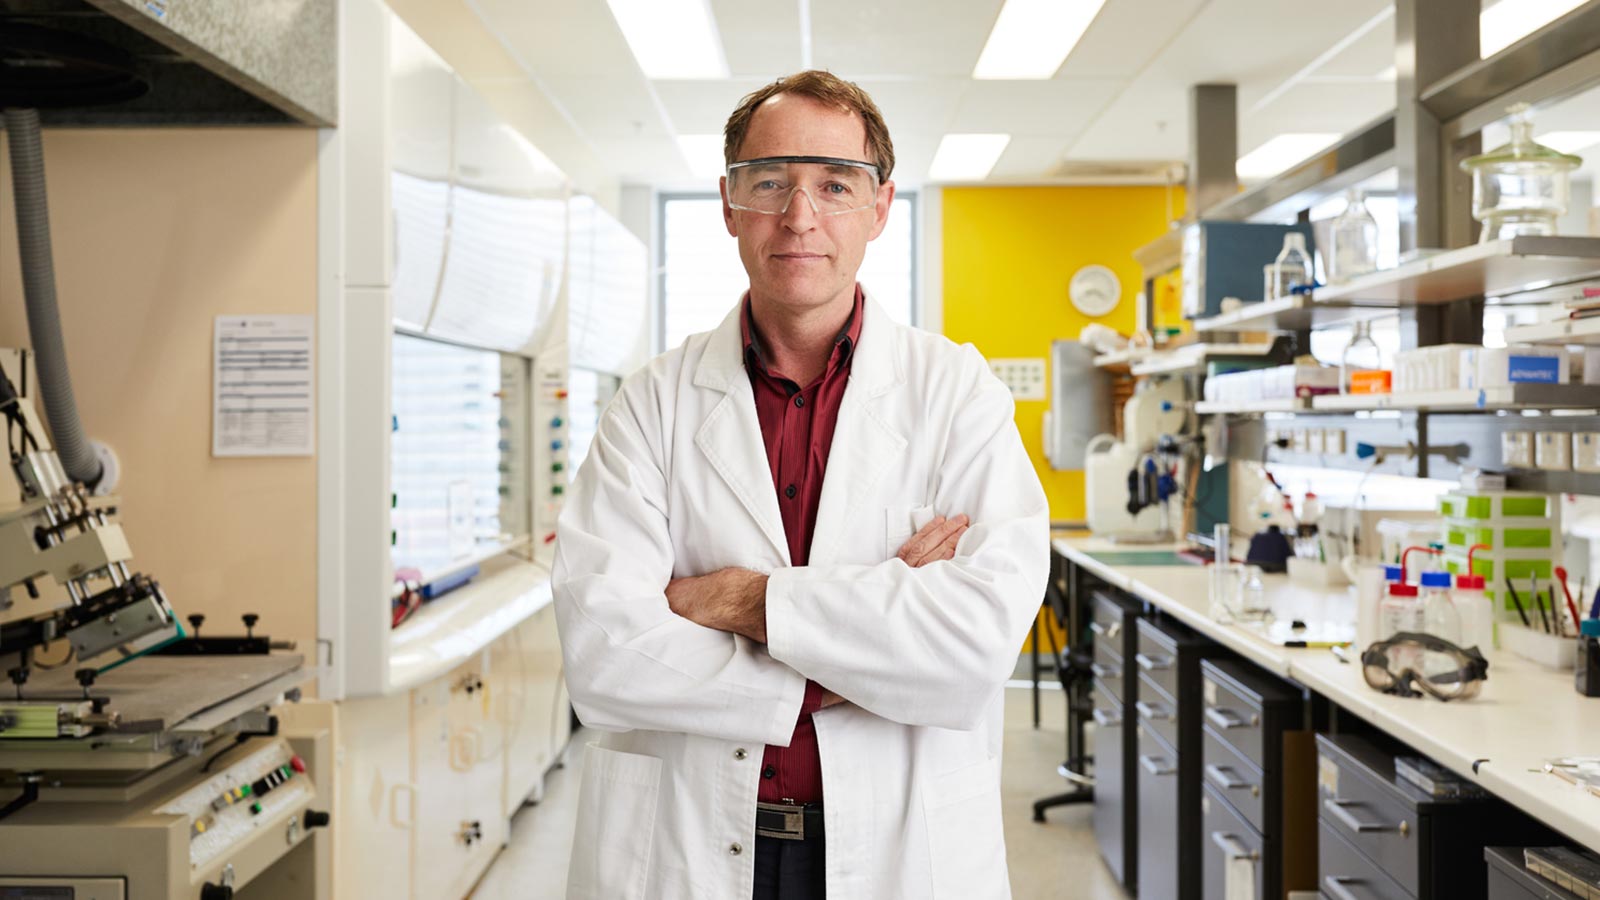 Geoff Spinks is standing in a lab, wearing a white labcoat and lab goggles with his arms crossed.